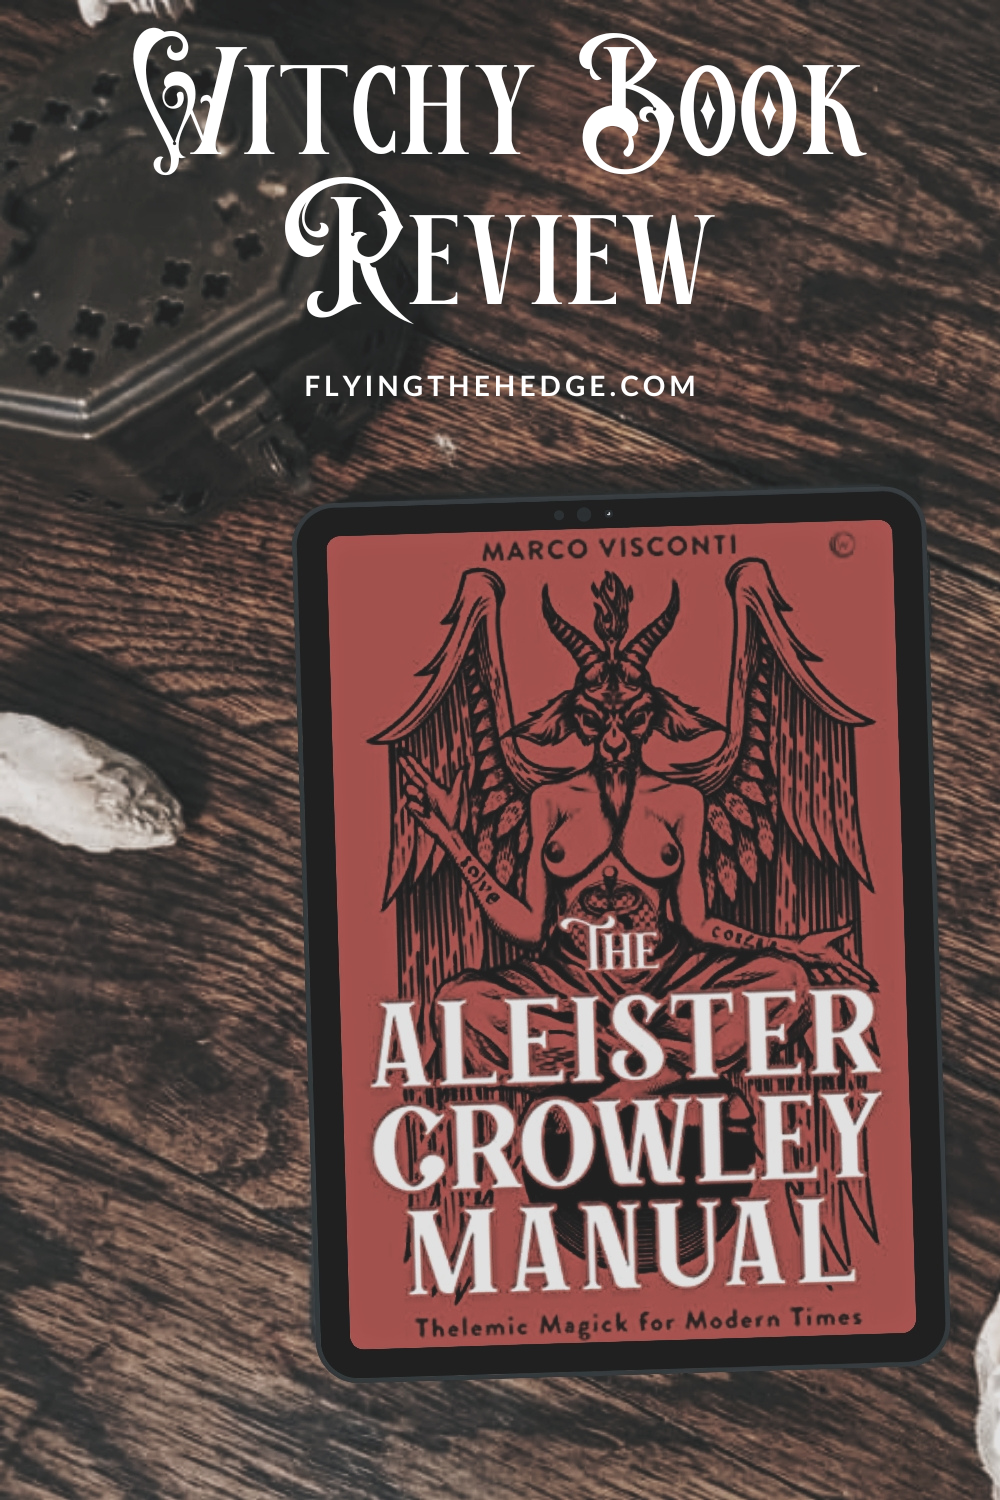 Thelema, Thelemic, Crowley, high magick, ceremonial magic, free masons, Aleister Crowley, hedgewitch, hedge witch, witch, witchy, witchcraft, pagan, neopagan, occult, magick, magic, book, book review